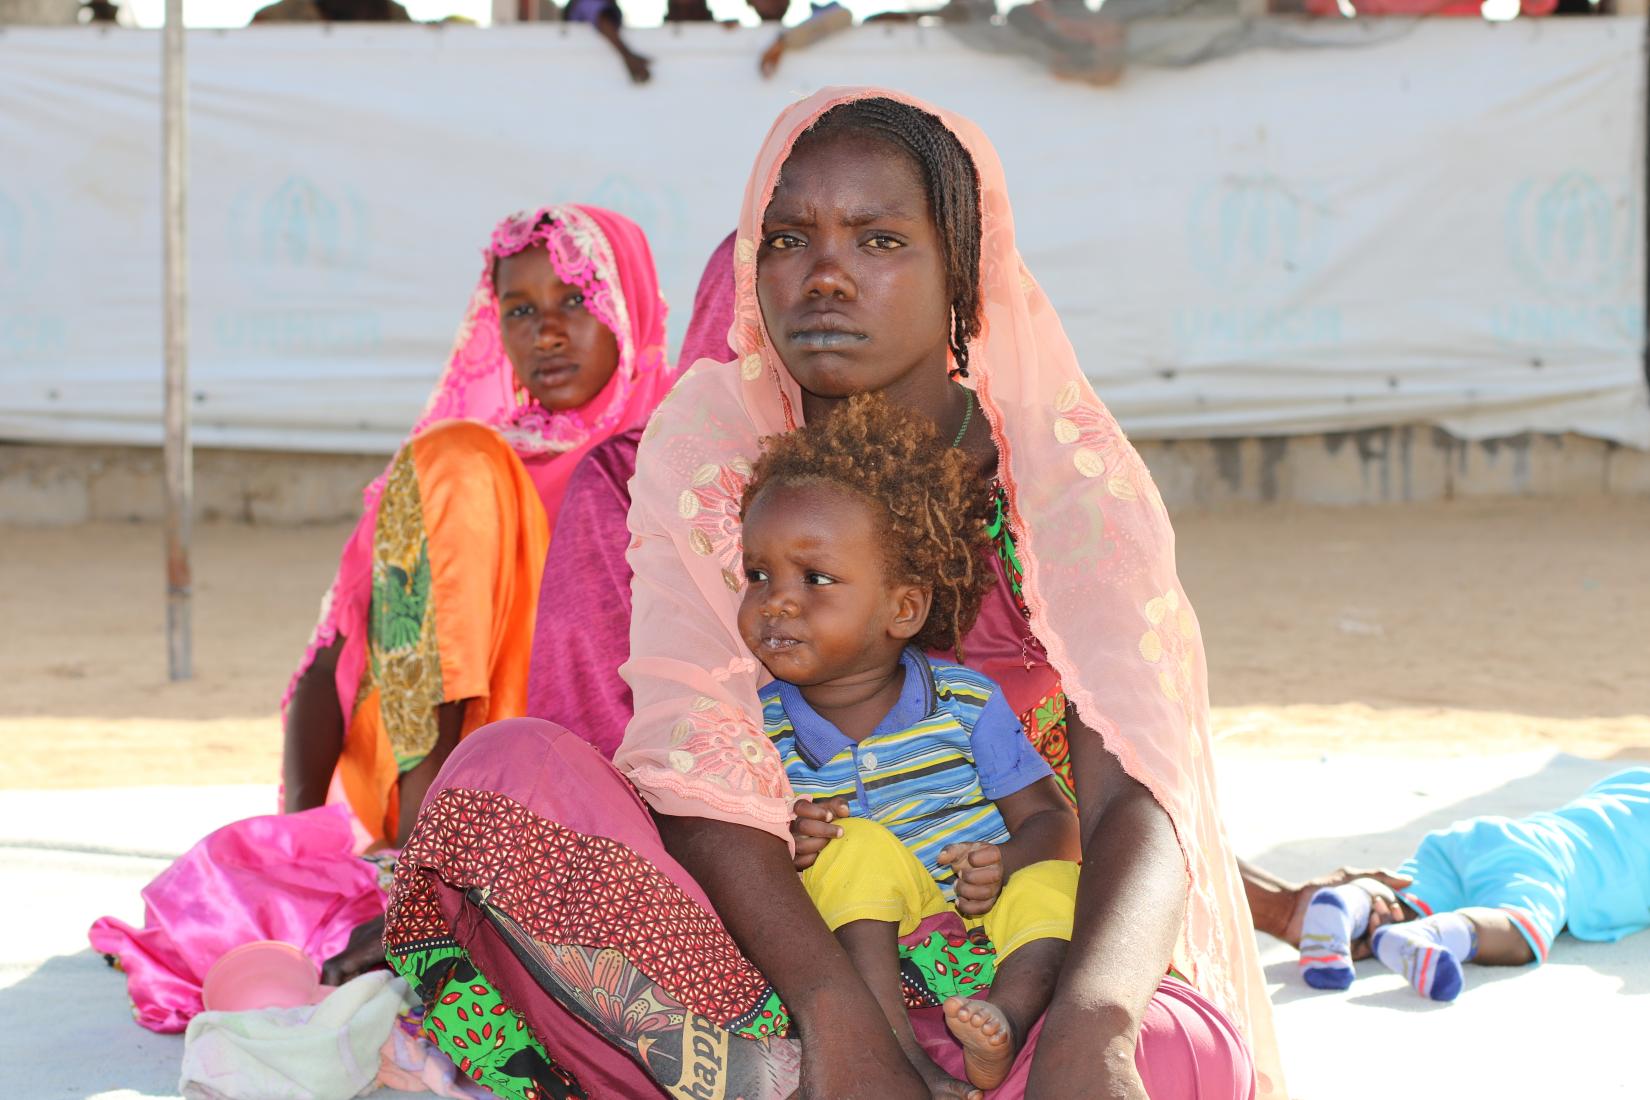 Woman affected by the humanitarian crises 